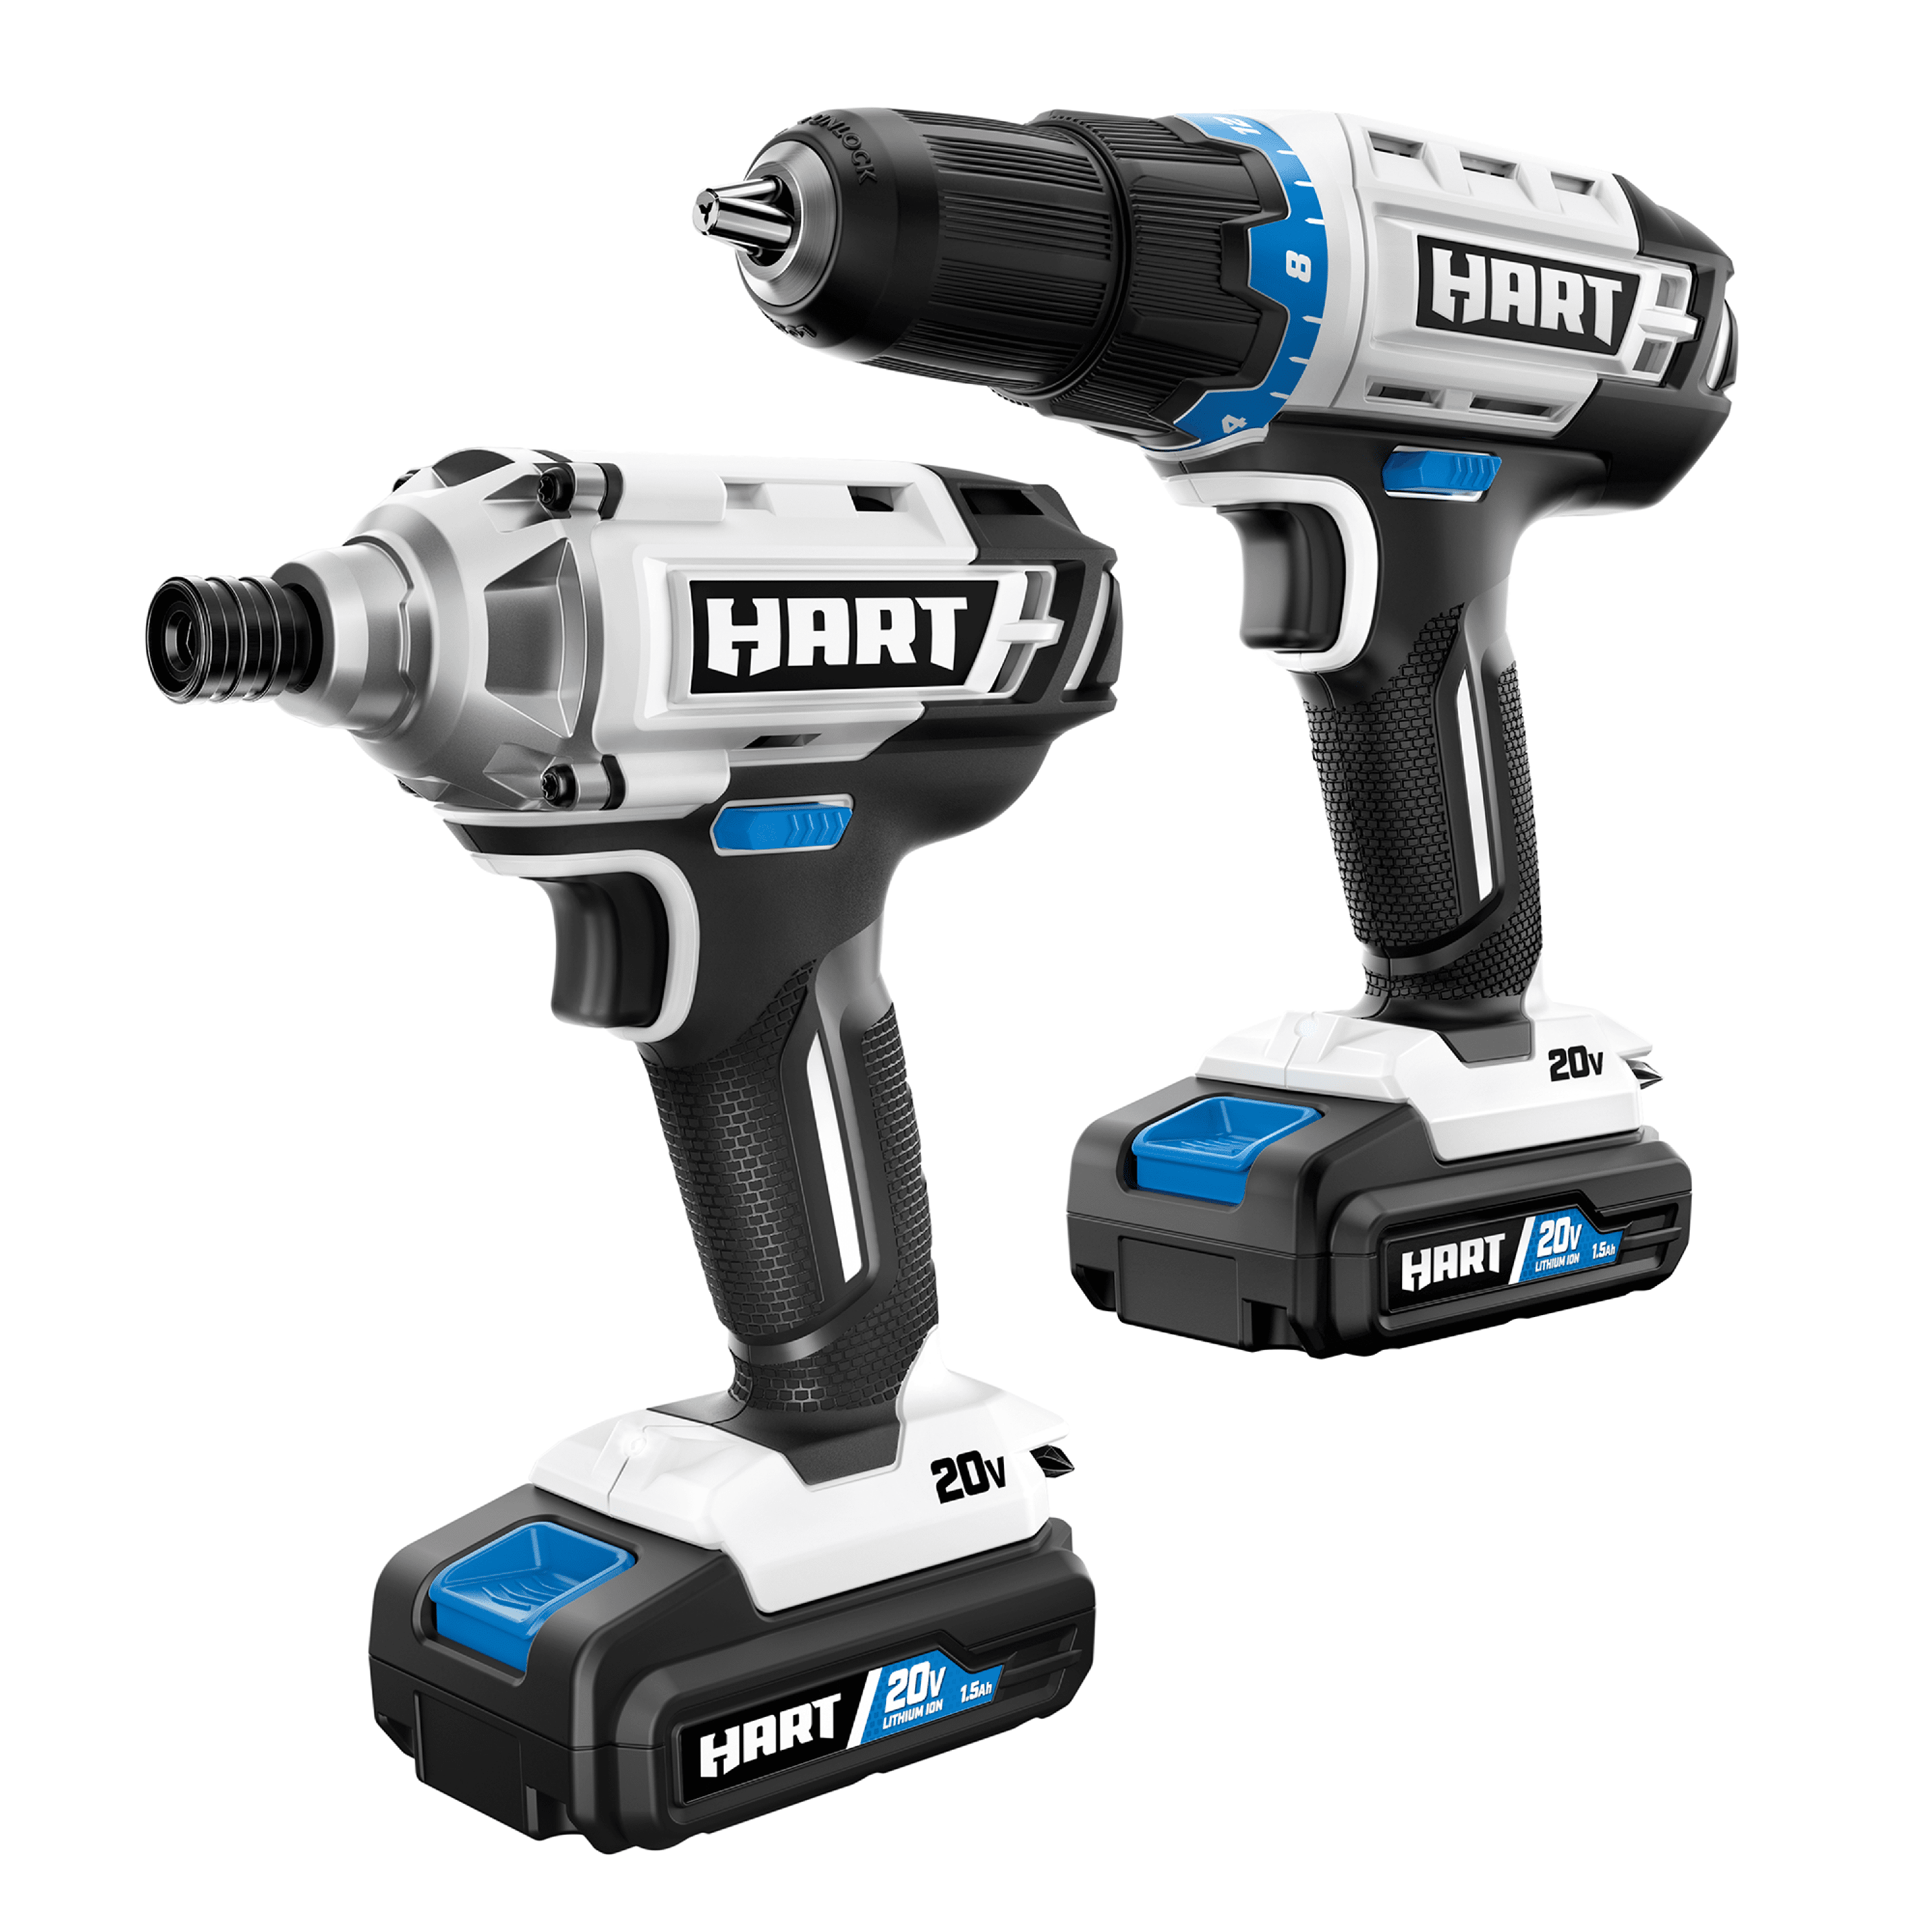 HART 20-Volt Cordless Drill and Impact Combo Kit with (2) 1.5Ah Lithium-Ion Batteries and Charger